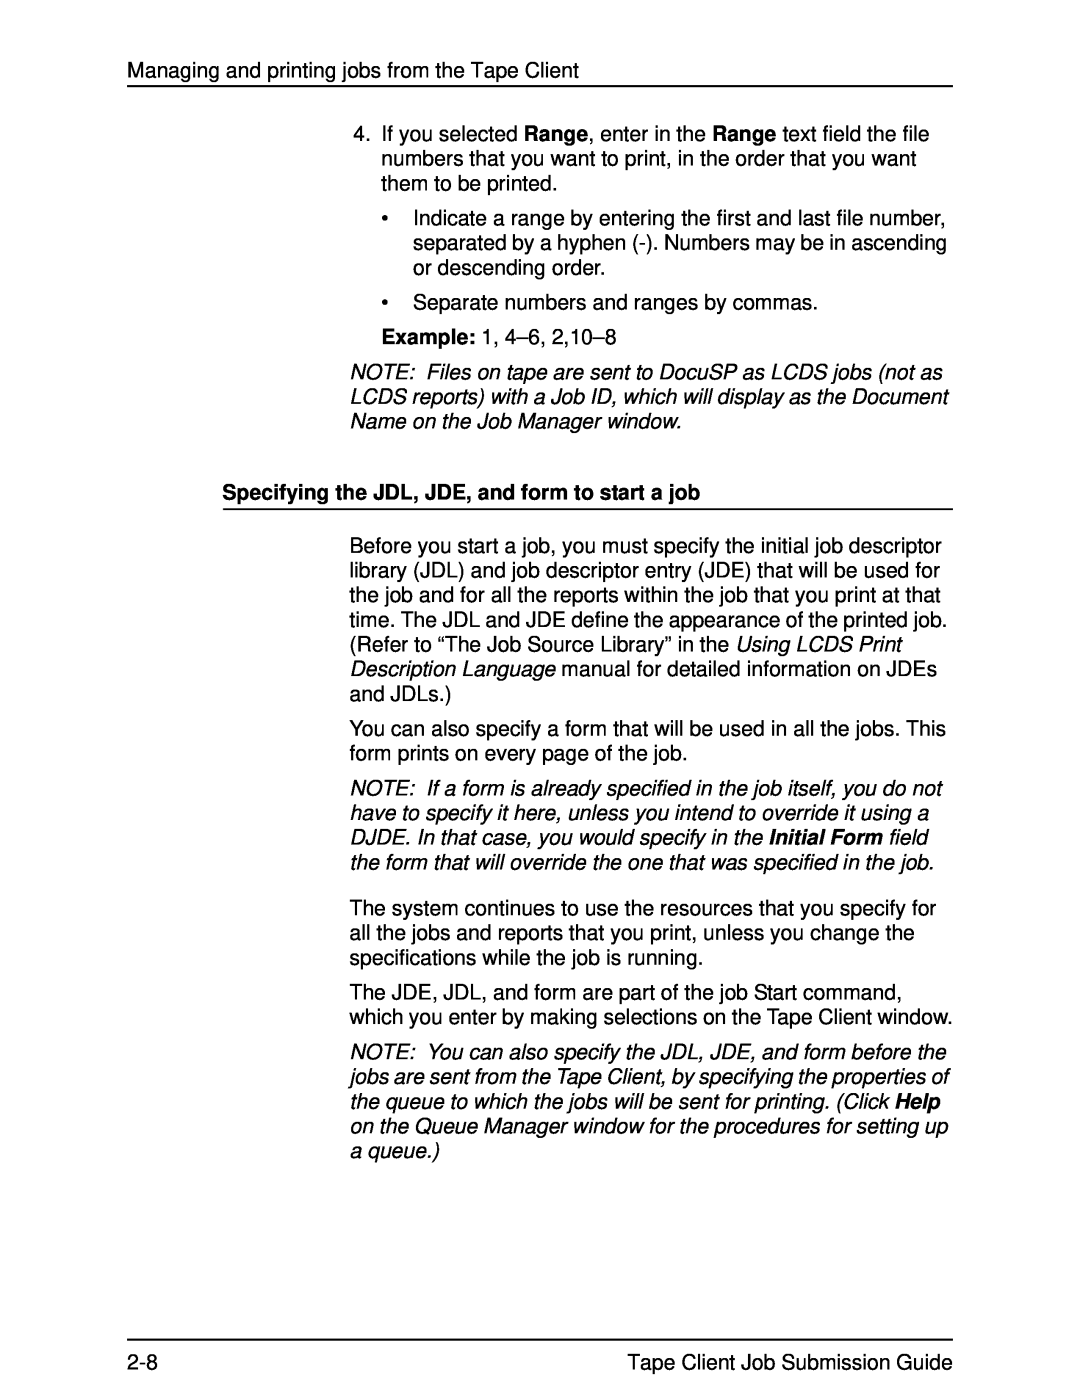 Xerox 701P21110 manual Specifying the JDL, JDE, and form to start a job 